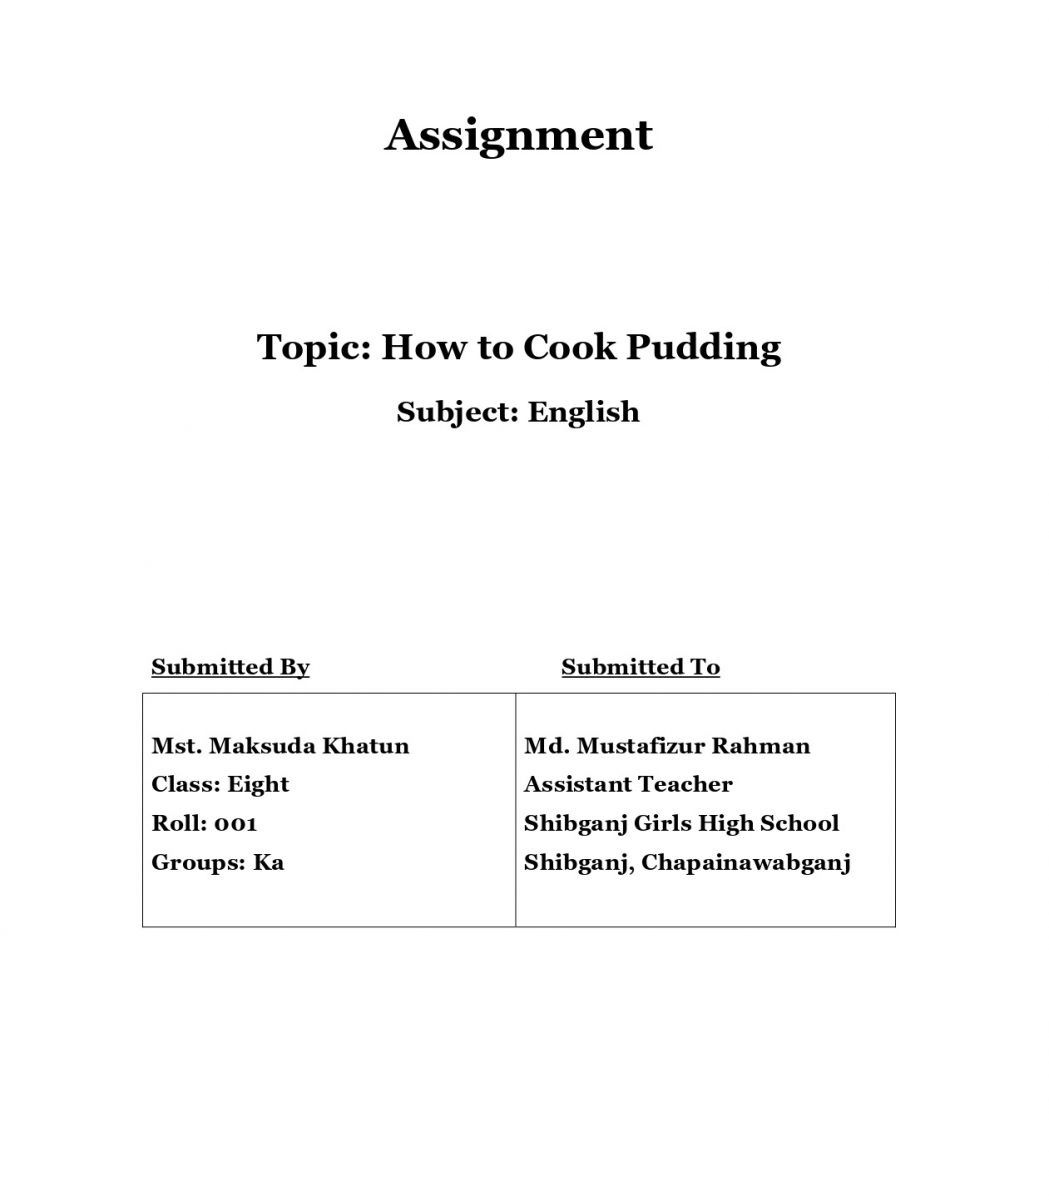 image of assignment cover